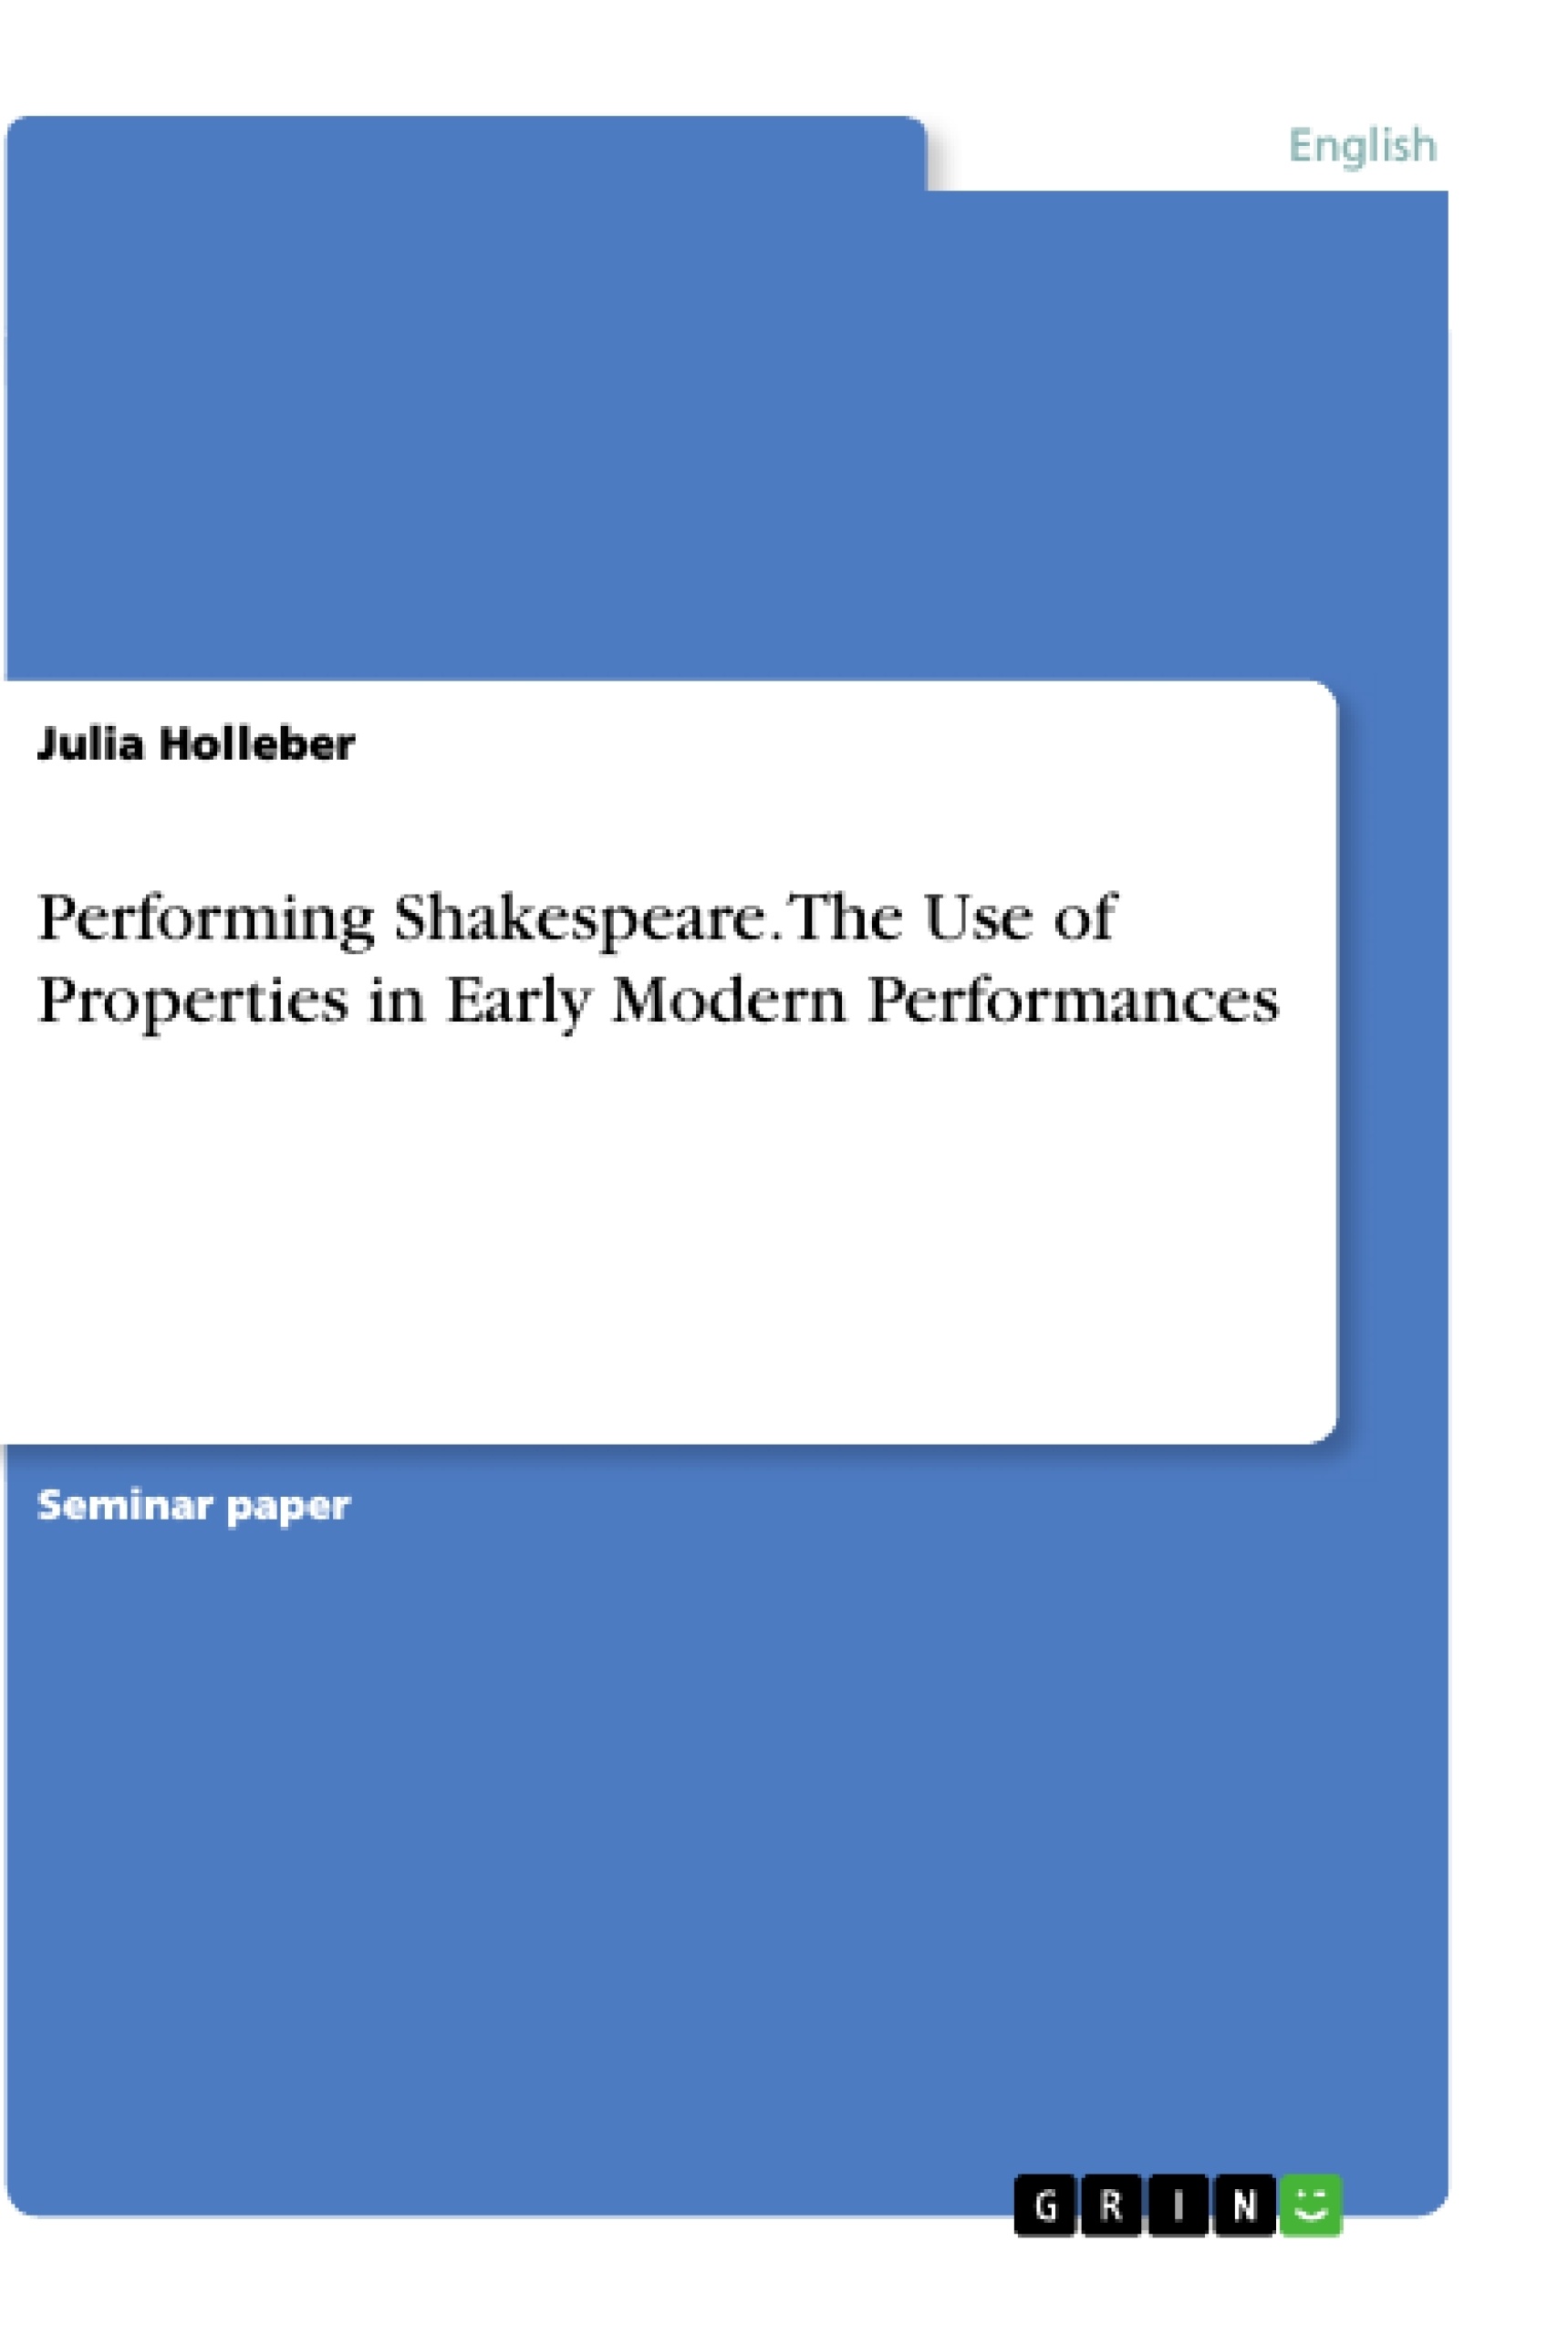 Title: Performing Shakespeare. The Use of Properties in Early Modern Performances